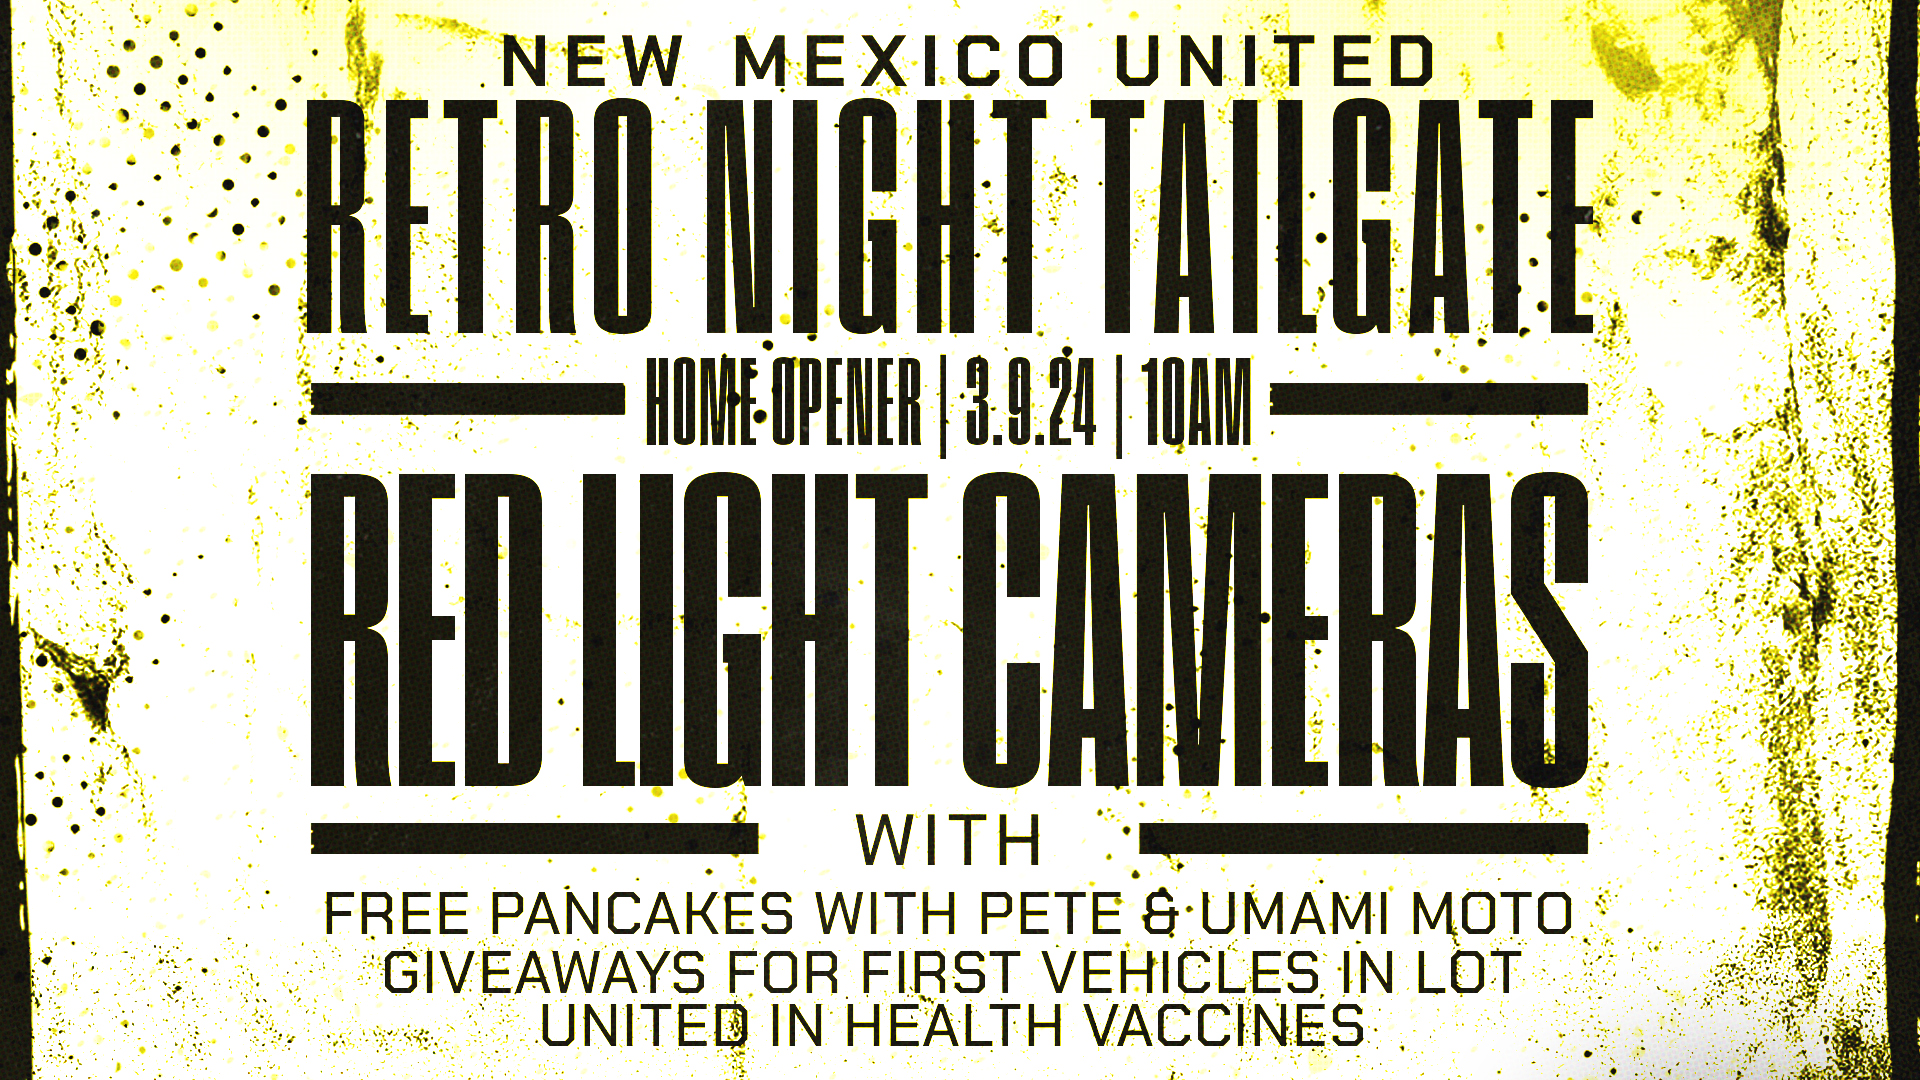 NEW MEXICO UNITED UNVEILS MASSIVE TAILGATE LINEUP FOR MARCH 9TH HOME OPENER featured image